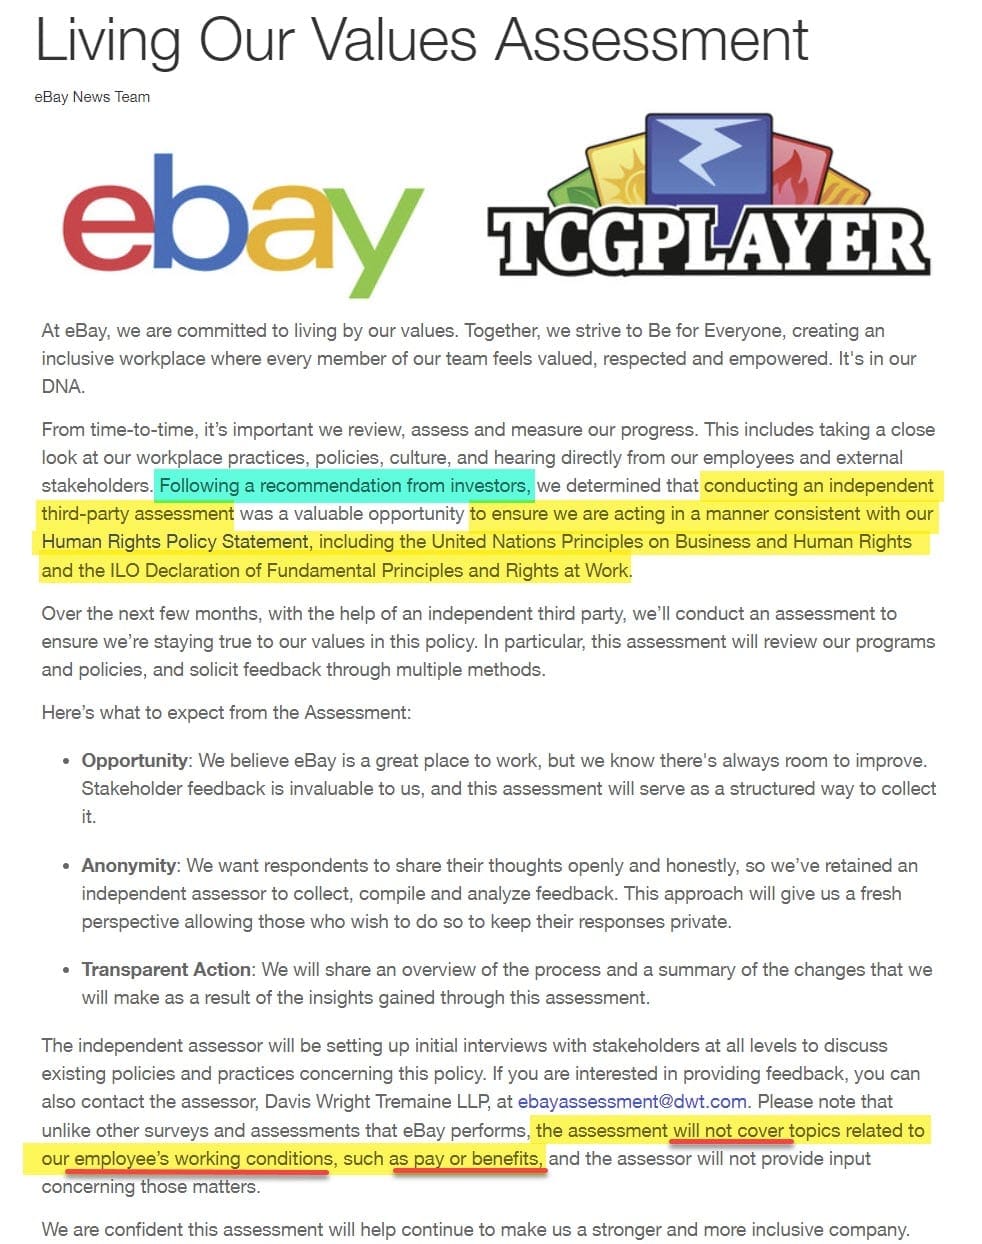 Investors Nudge eBay To Conduct Values Assessment As TCGPlayer M&A Scrutiny Heats Up